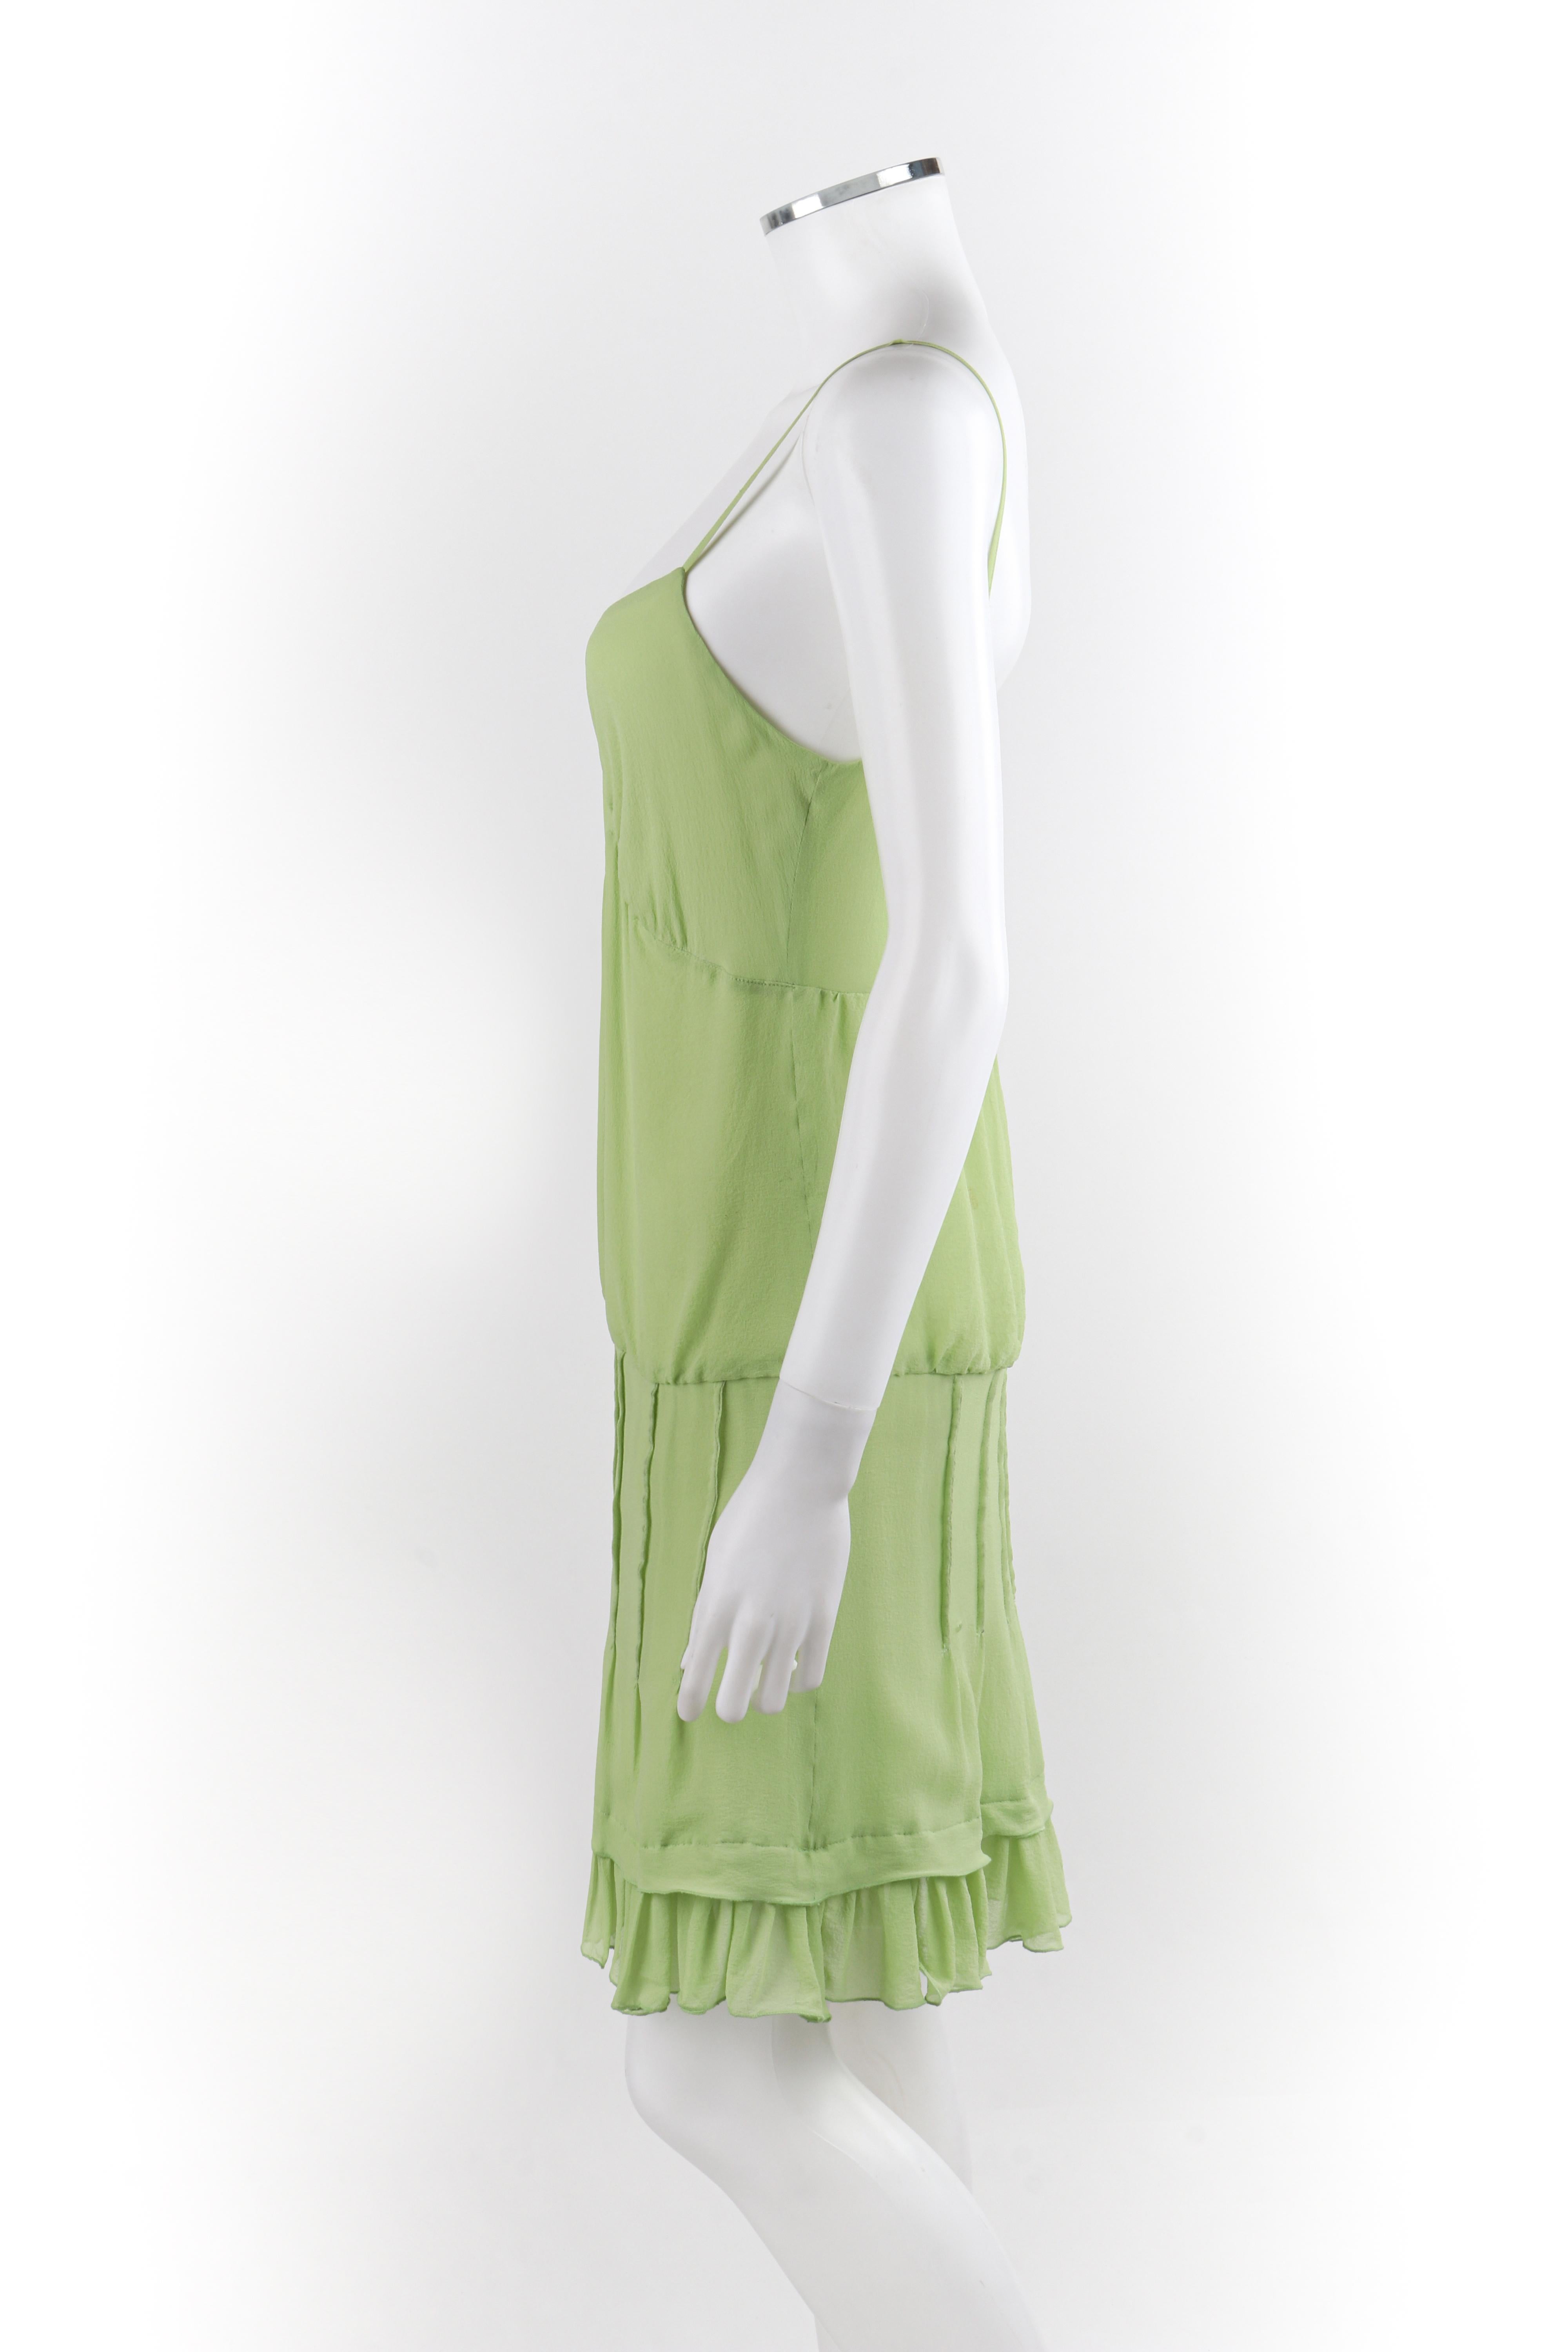 ALEXANDER MCQUEEN S/S 1996 Chartreuse Ruffled Tiered V-neck Pleated Sundress  For Sale 3